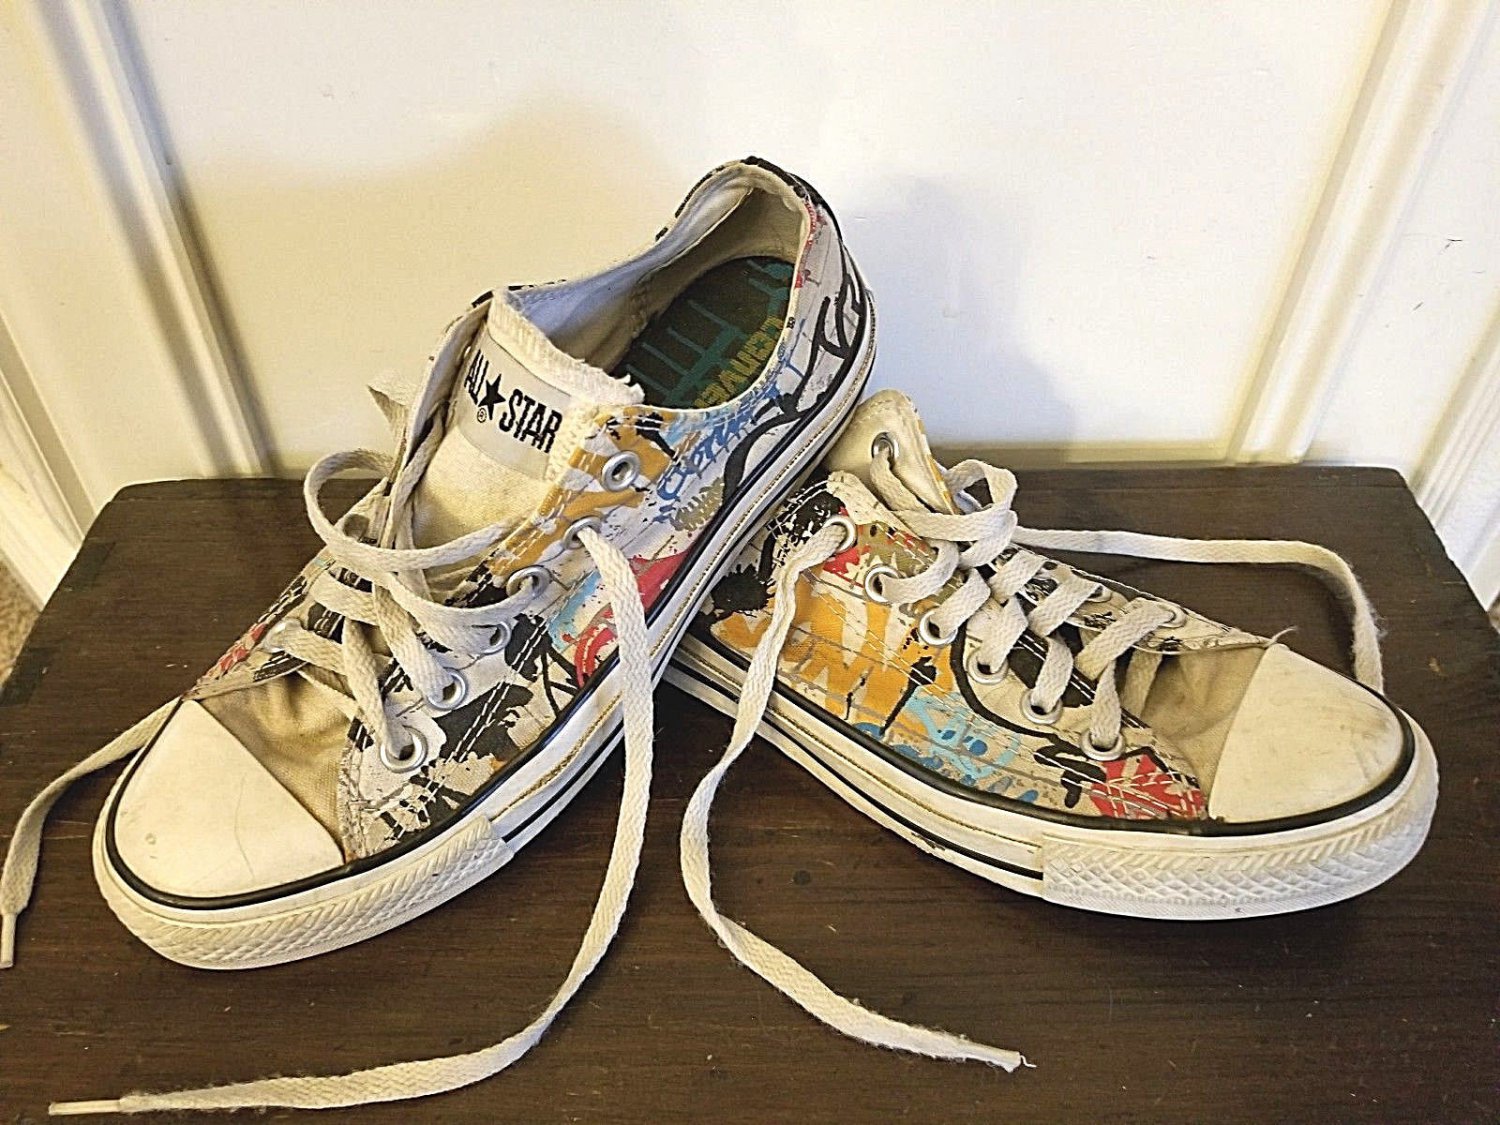 Converse Chuck Taylor All Star Oxford Sneakers Graffiti Low cut Shoes M ...